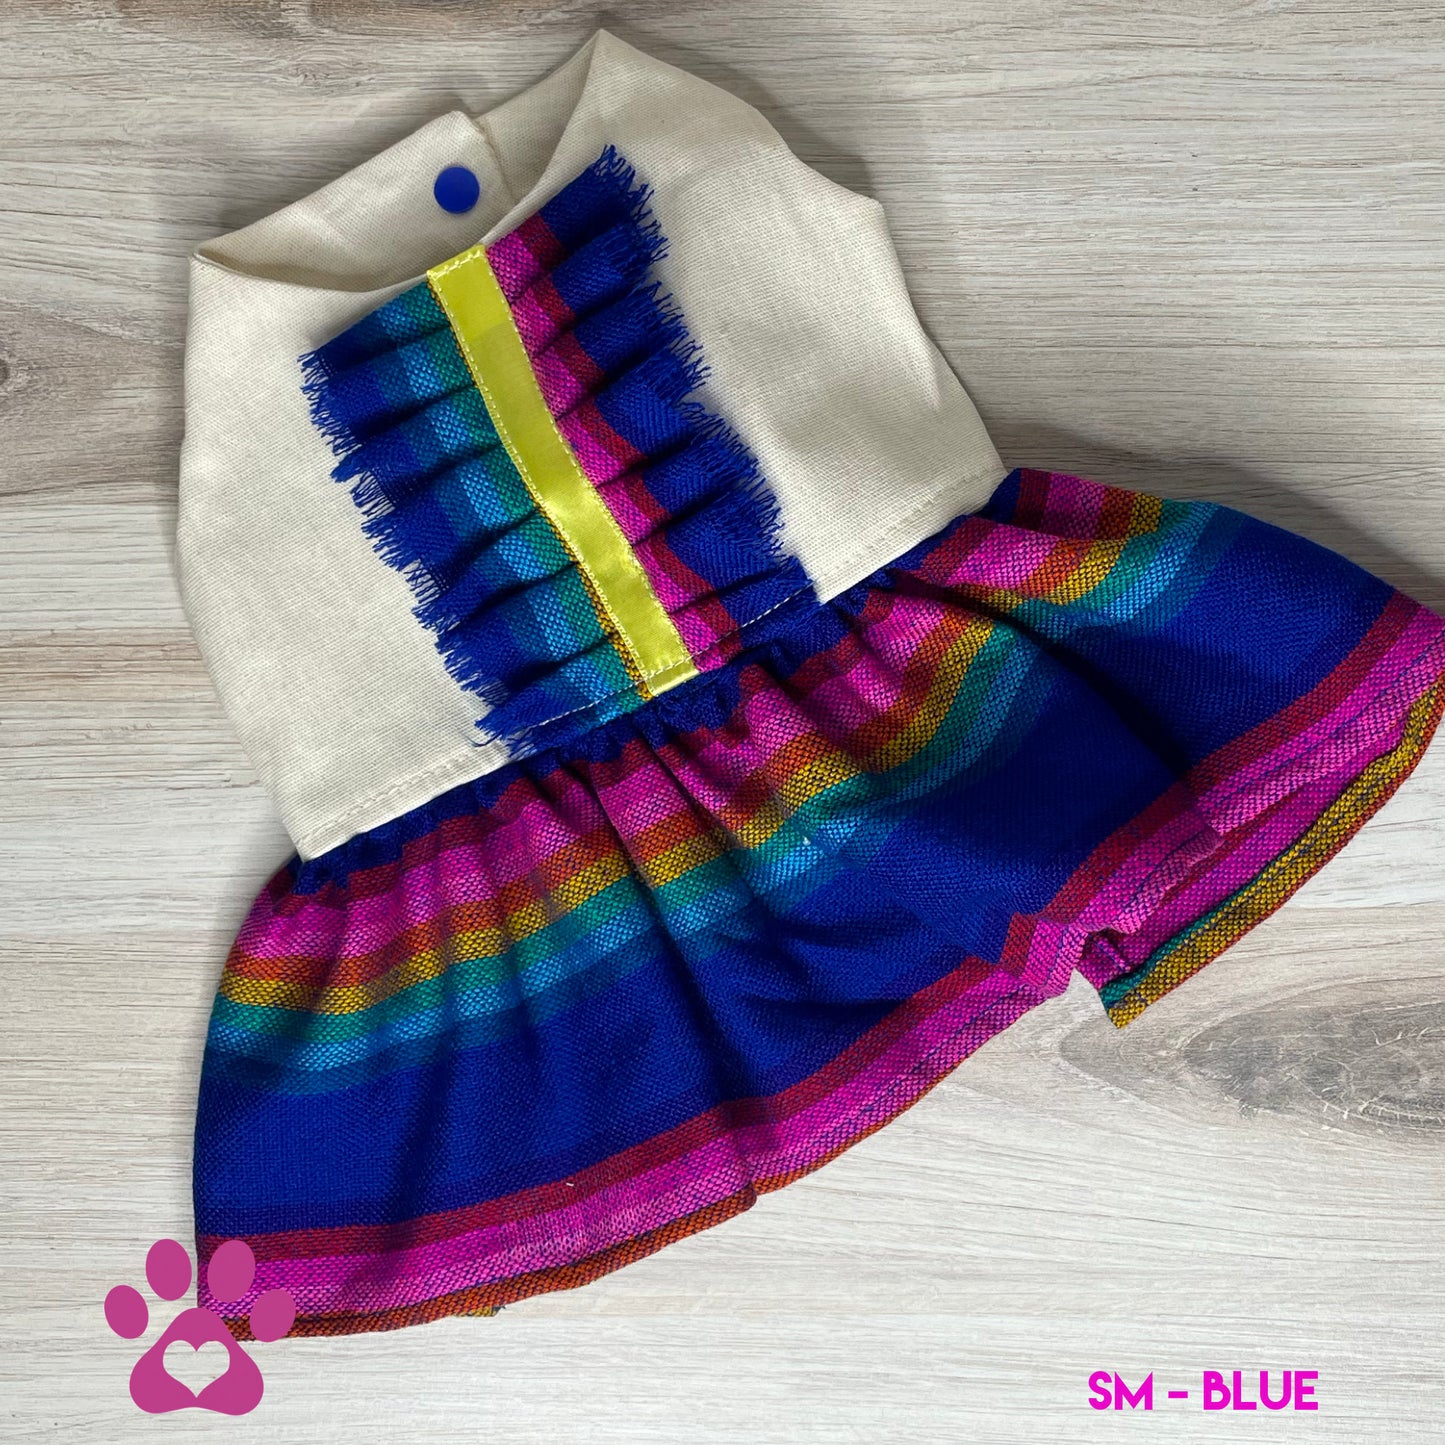 Mexican Style Dog Dress - Halter